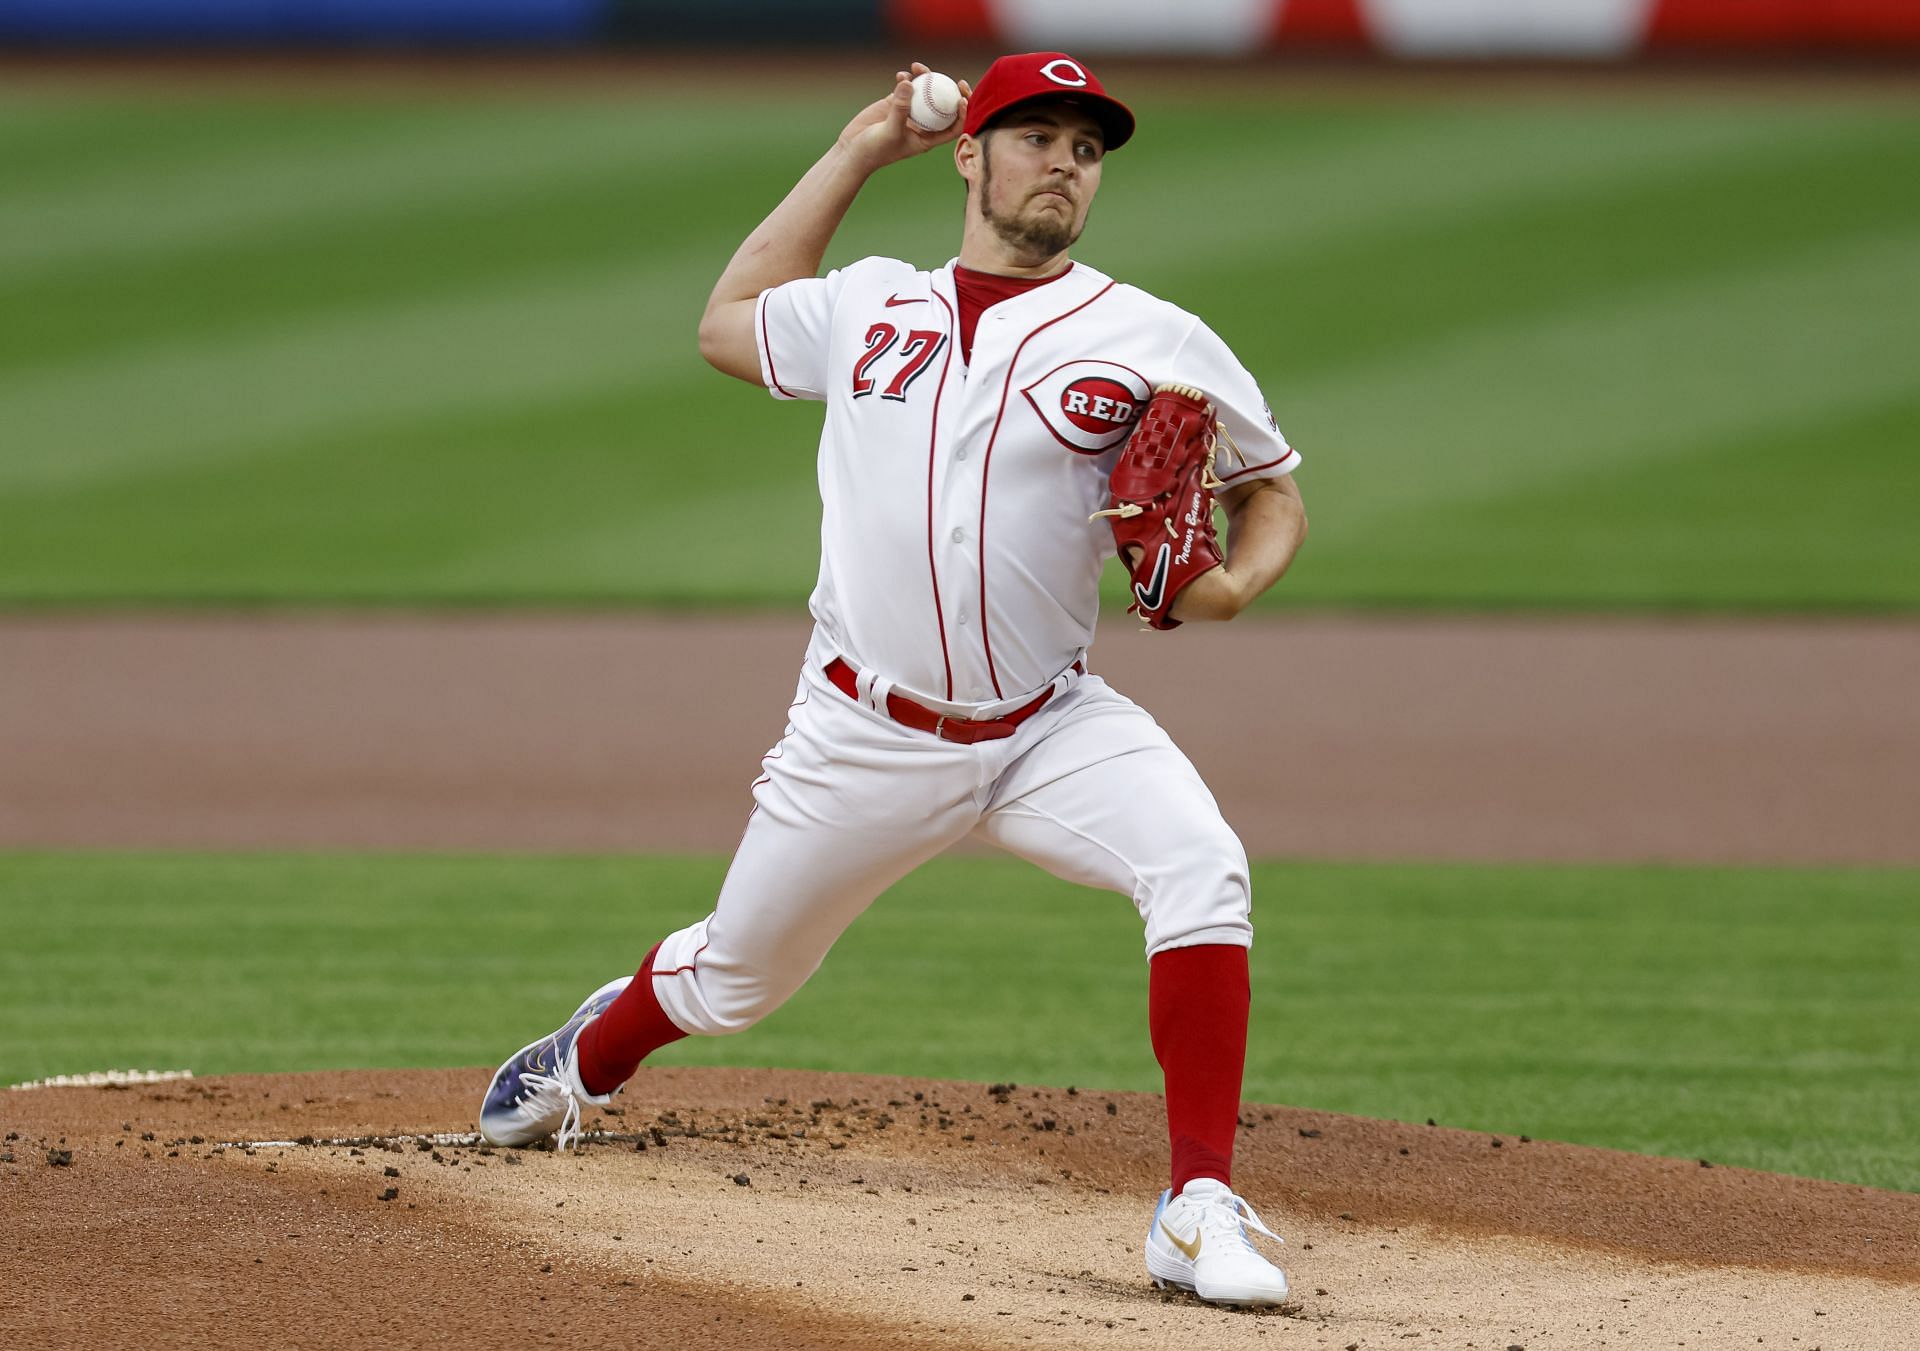 Trevor Bauer pitches against the Milwaukee Brewers at Great American Ball Park on September 23, 2020